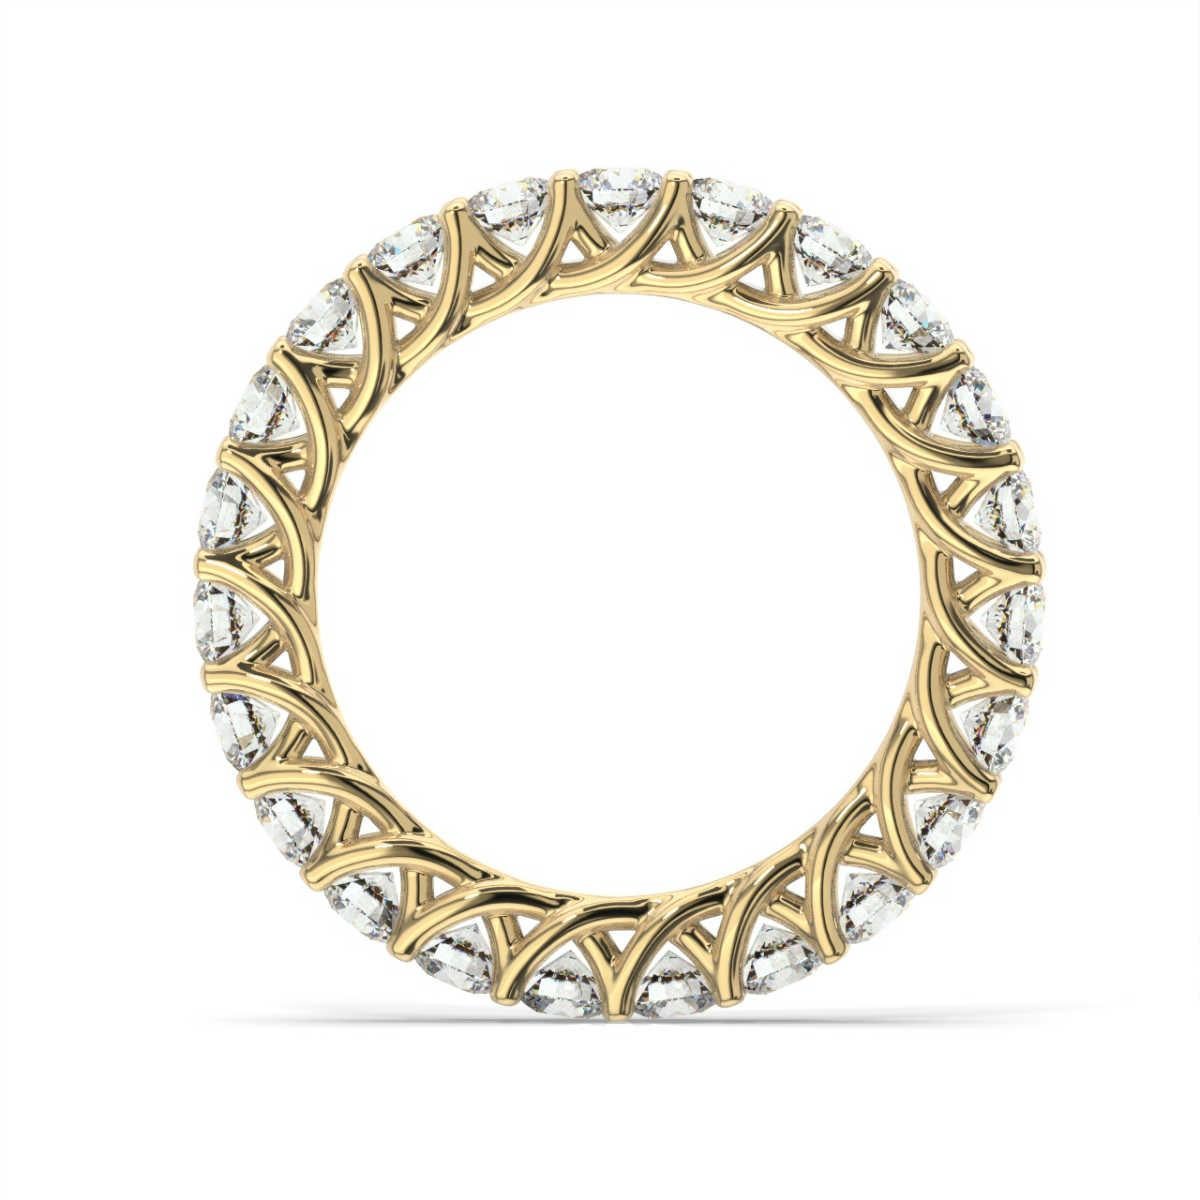 This stunning weave eternity ring features 23 perfectly matched round brilliant diamonds. Experience the difference!

Product details: 

Center Gemstone Color: WHITE
Side Gemstone Type: NATURAL DIAMOND
Side Gemstone Shape: ROUND
Metal: 14K Yellow